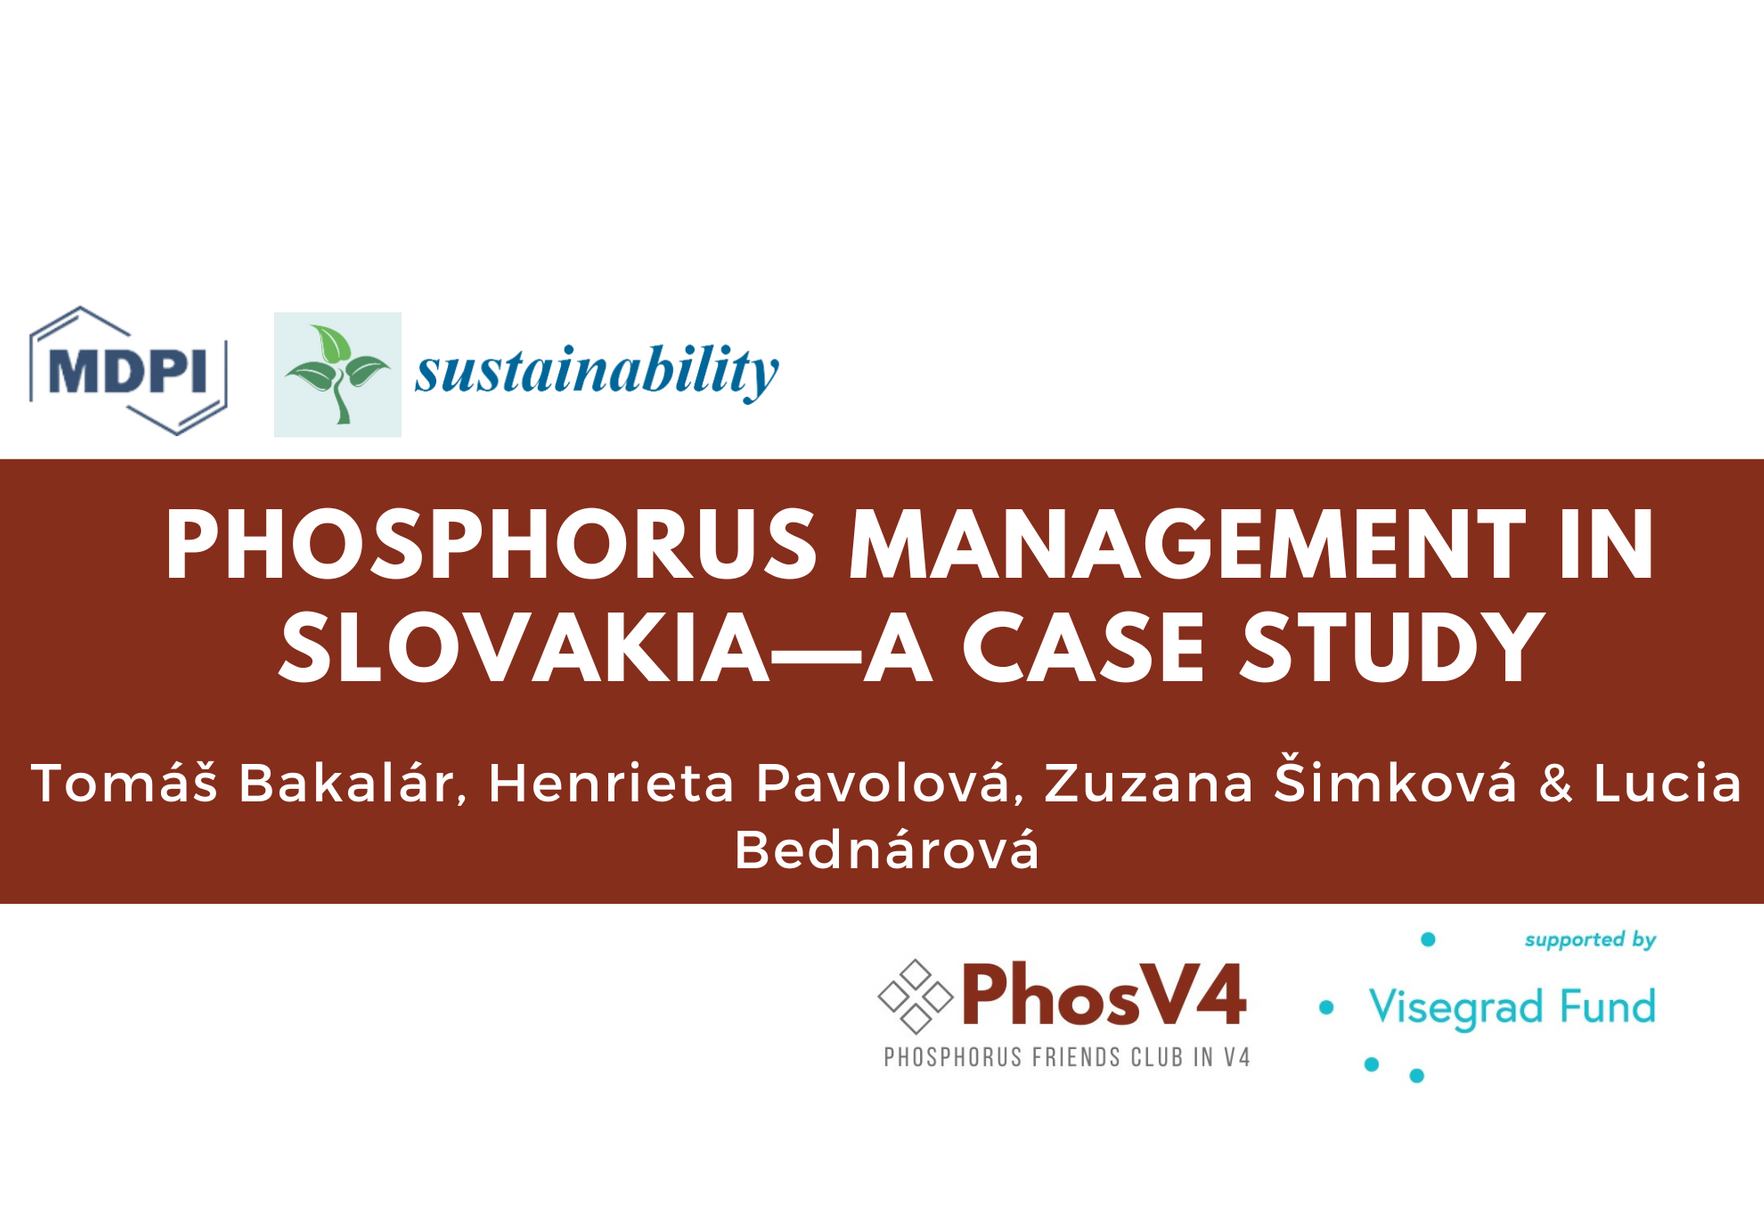 Article: Phosphorus Management in Slovakia—A Case Study